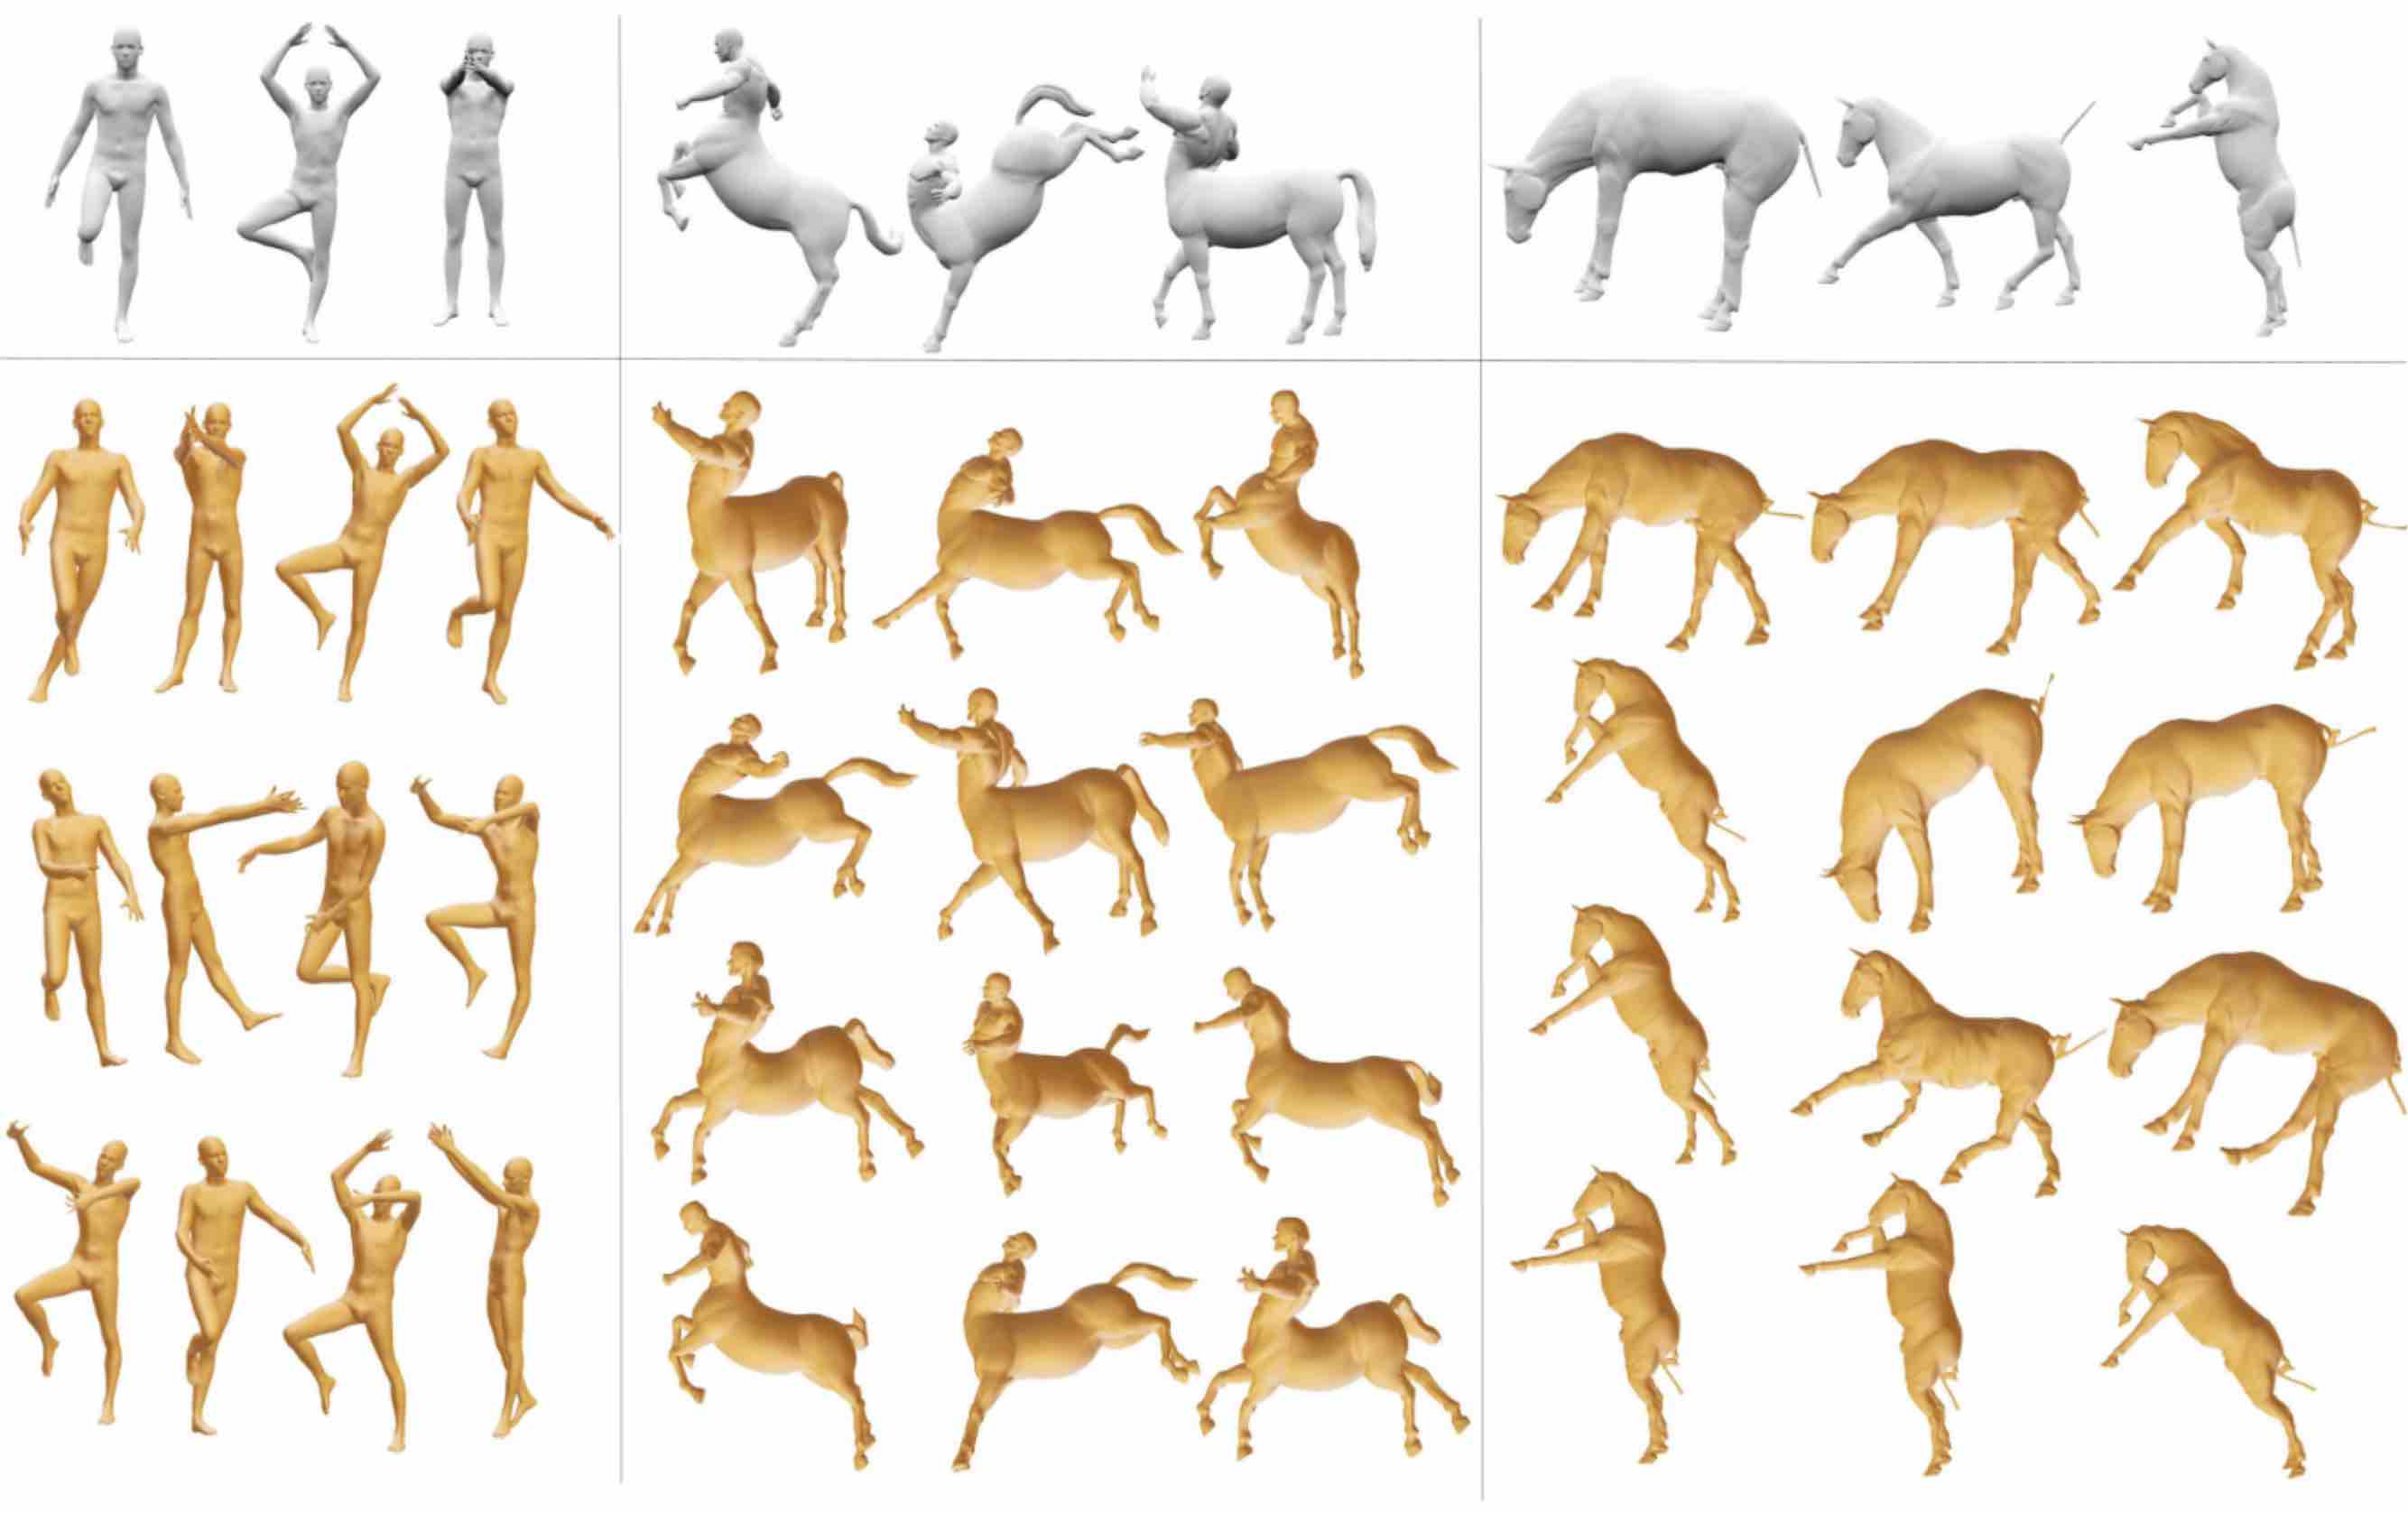 Various poses (orange) generated by our method from a few landmark poses (gray).